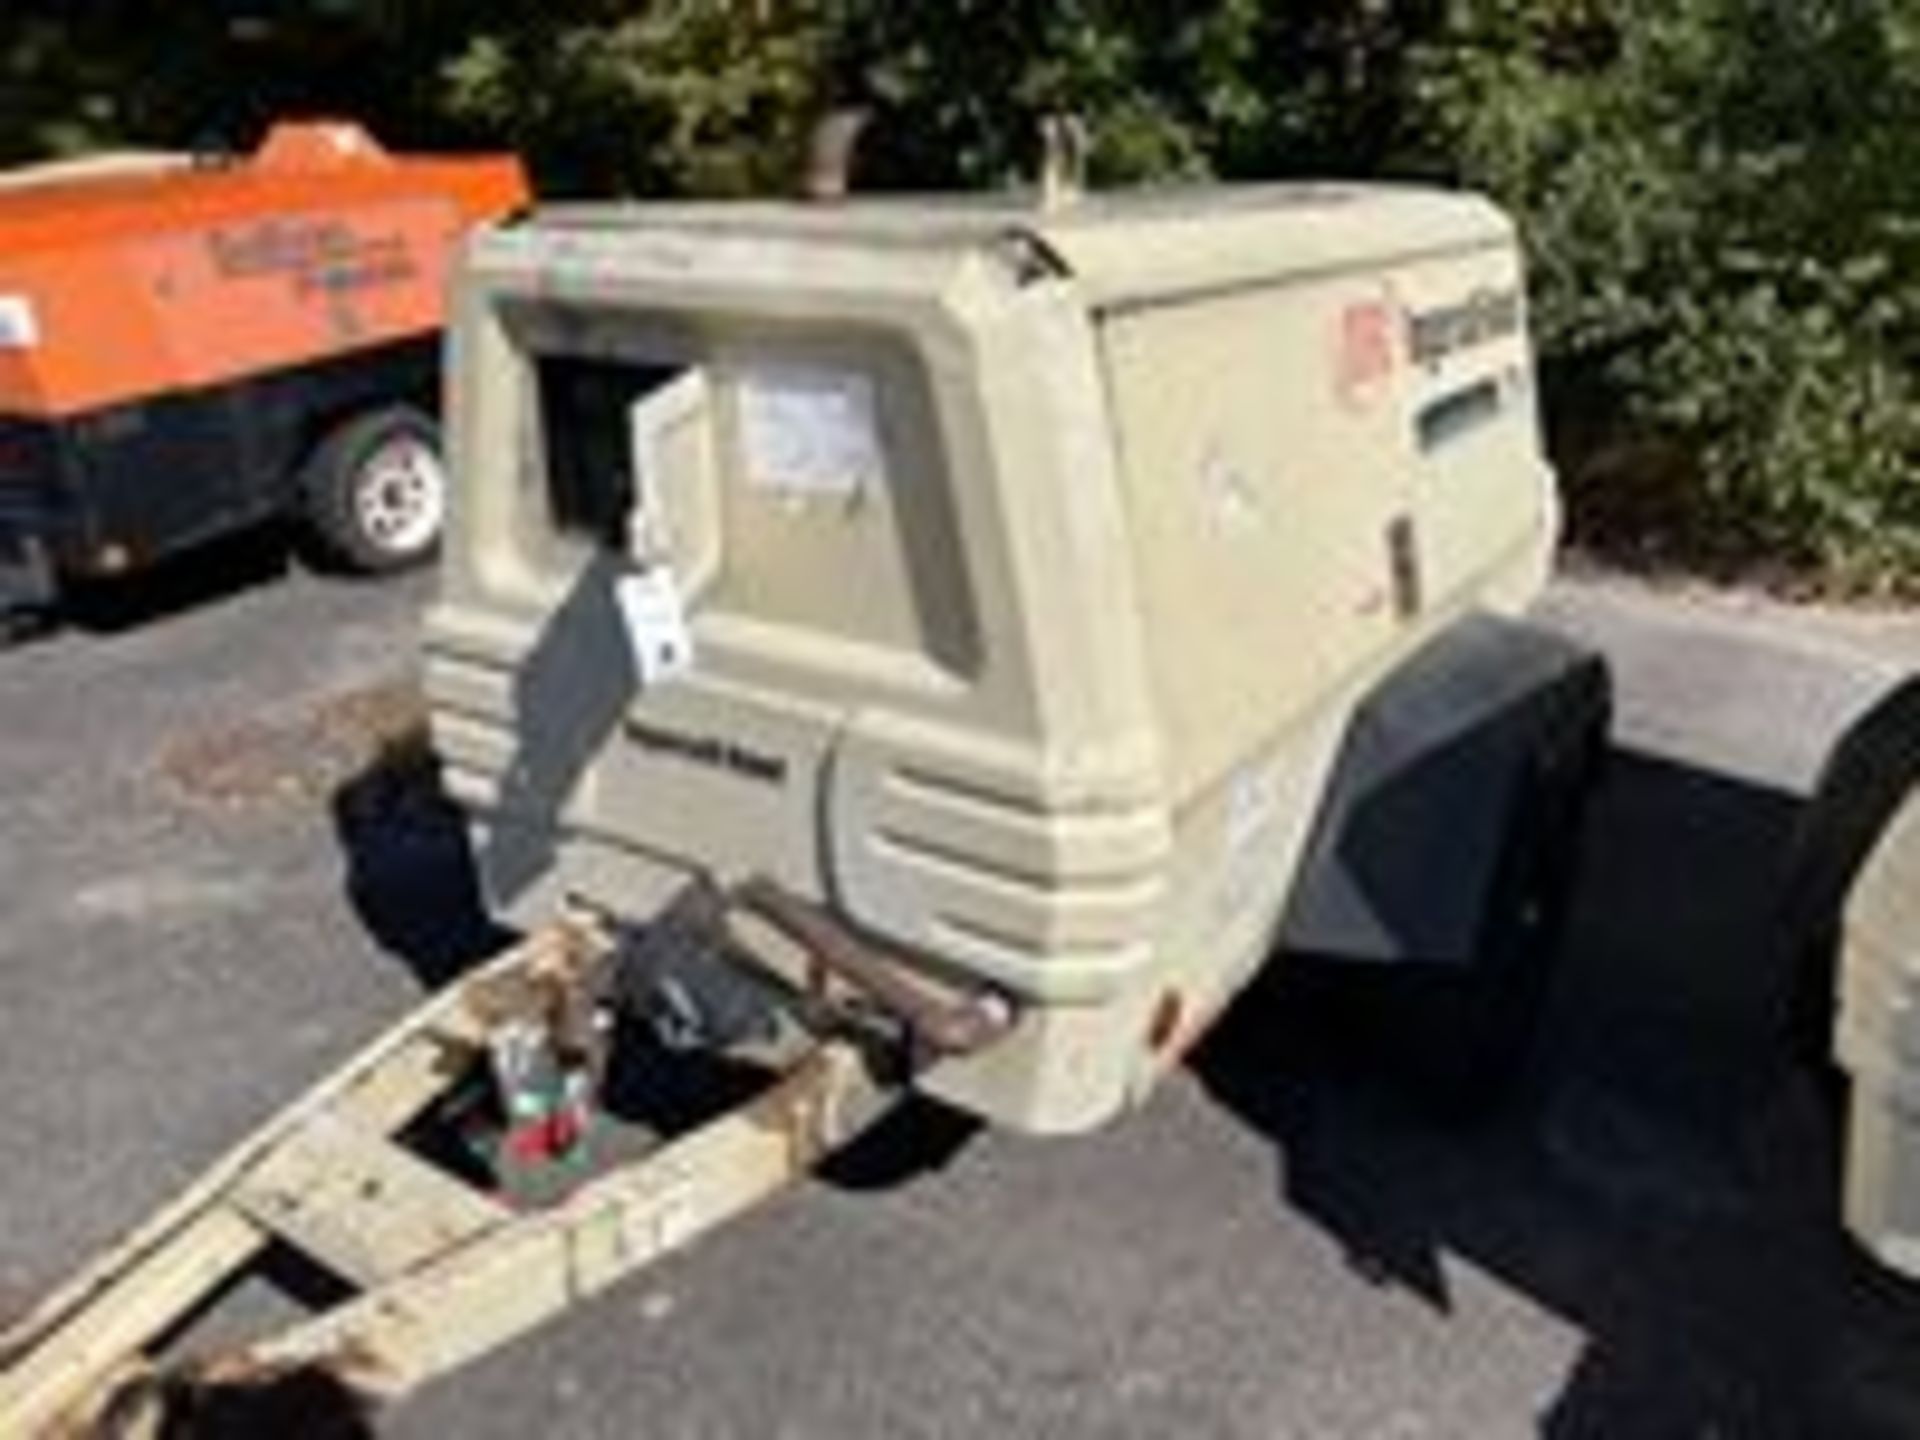 2003 Ingersoll Rand 185 Towable Air Compressor, Pintle Hitch, Hrs: 2,684, Vin#: 335269UBN221(DEAD BA - Image 6 of 11